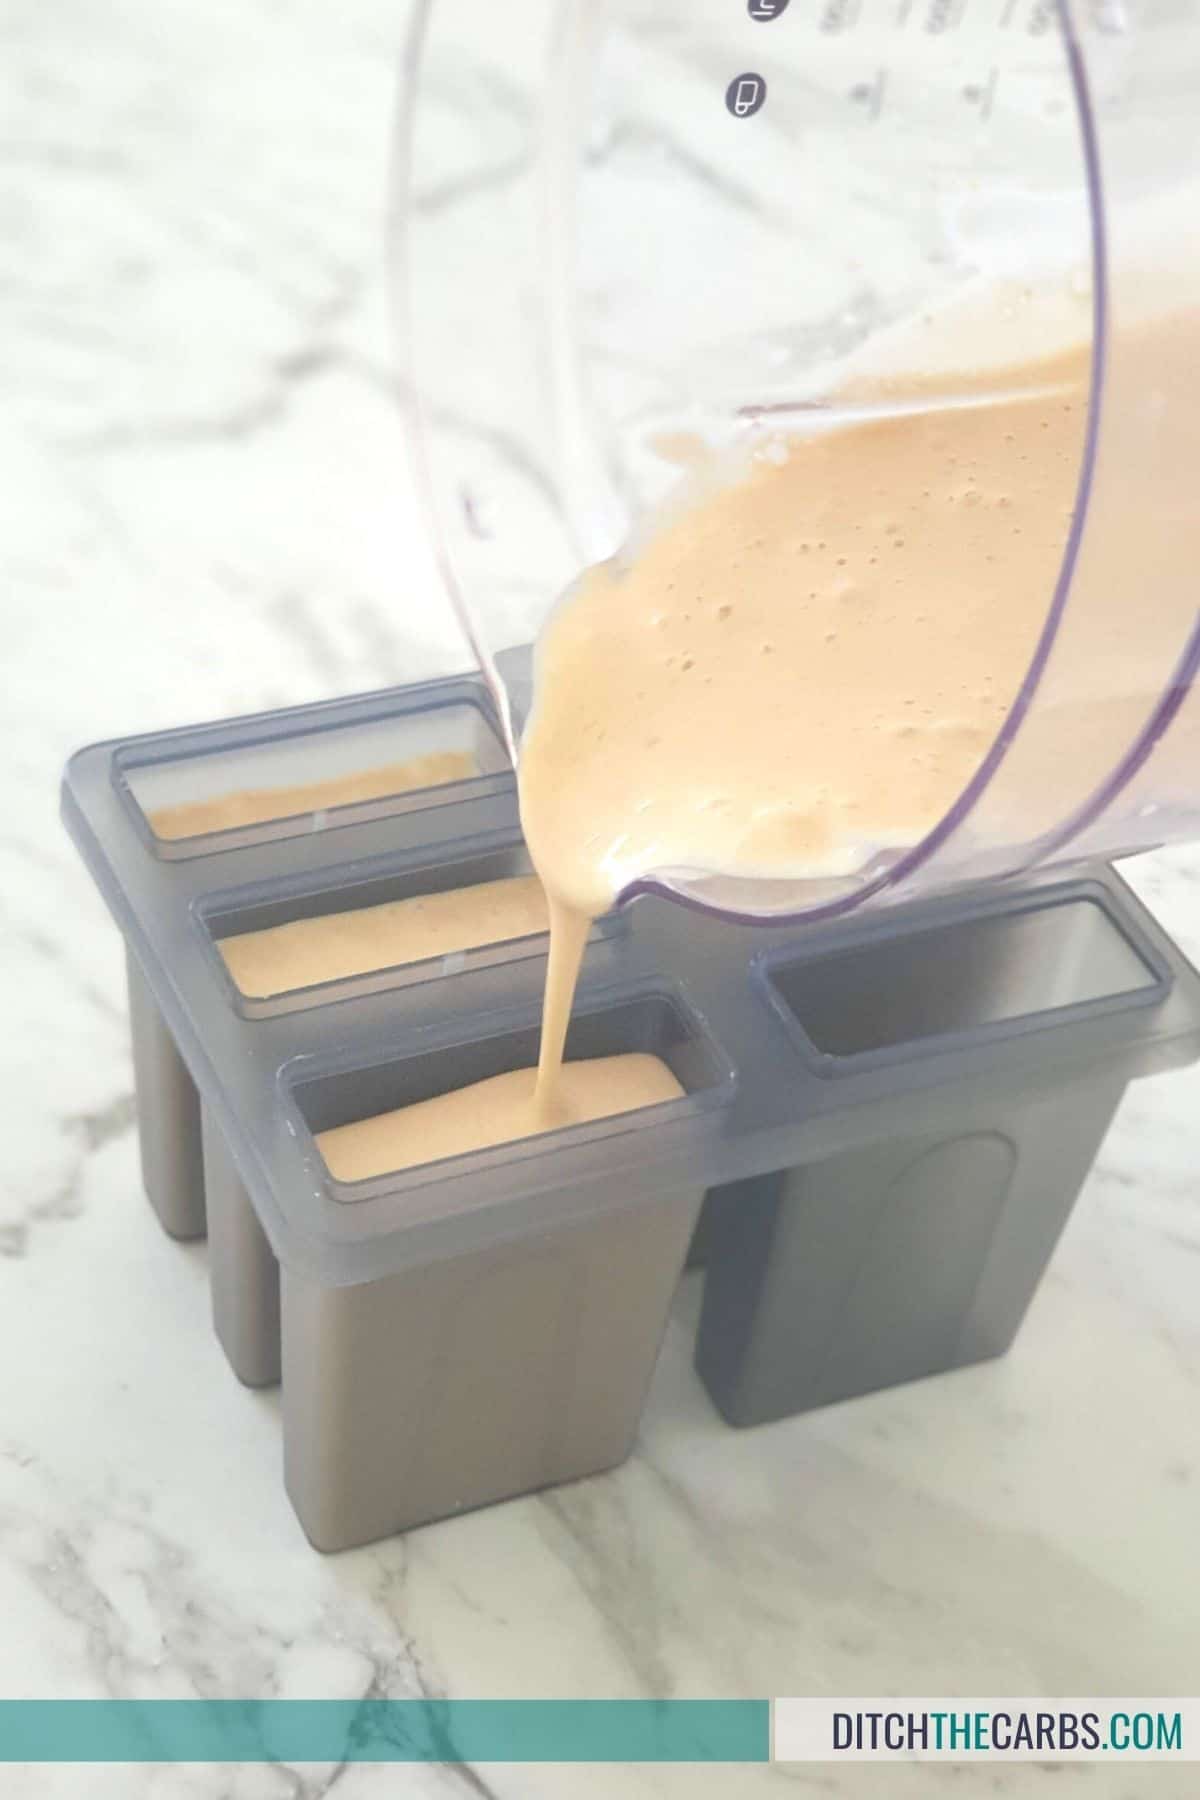 Pour ice cream into popsicle molds to make keto peanut butter ice cream